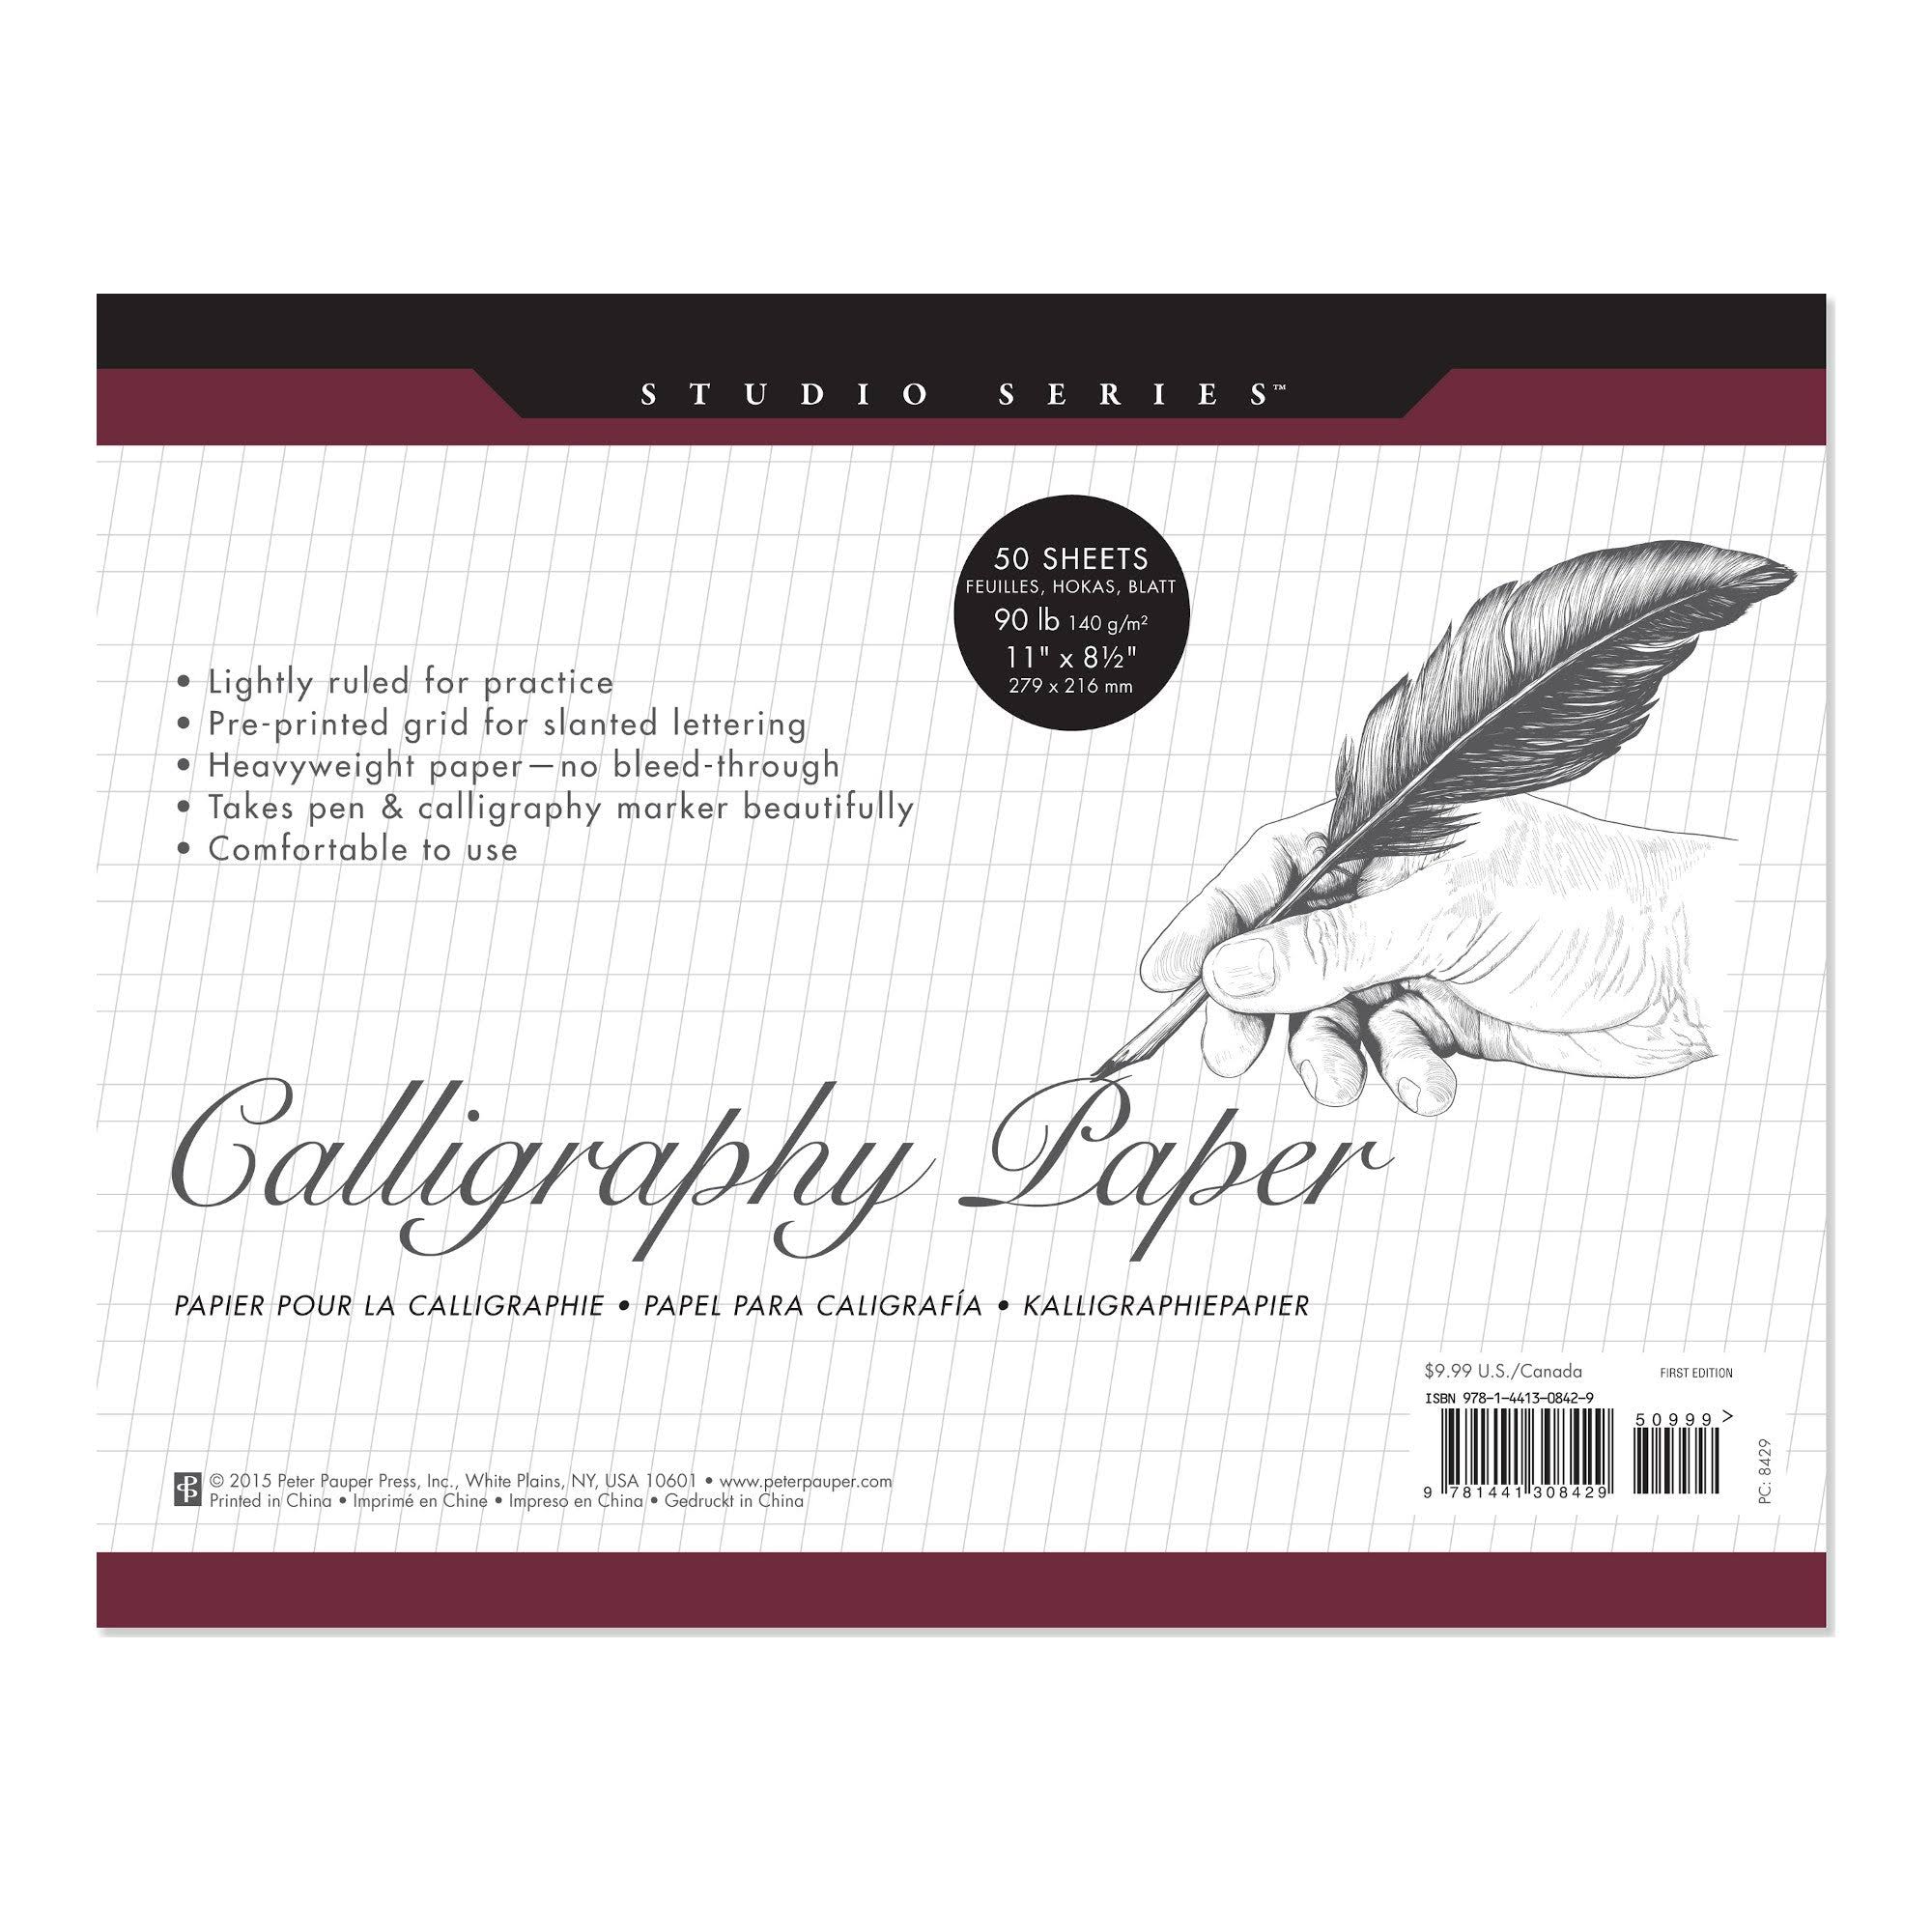 Calligraphy Paper ( Studio Series) - 50 Sheets, 11 inch x 8.5 inch